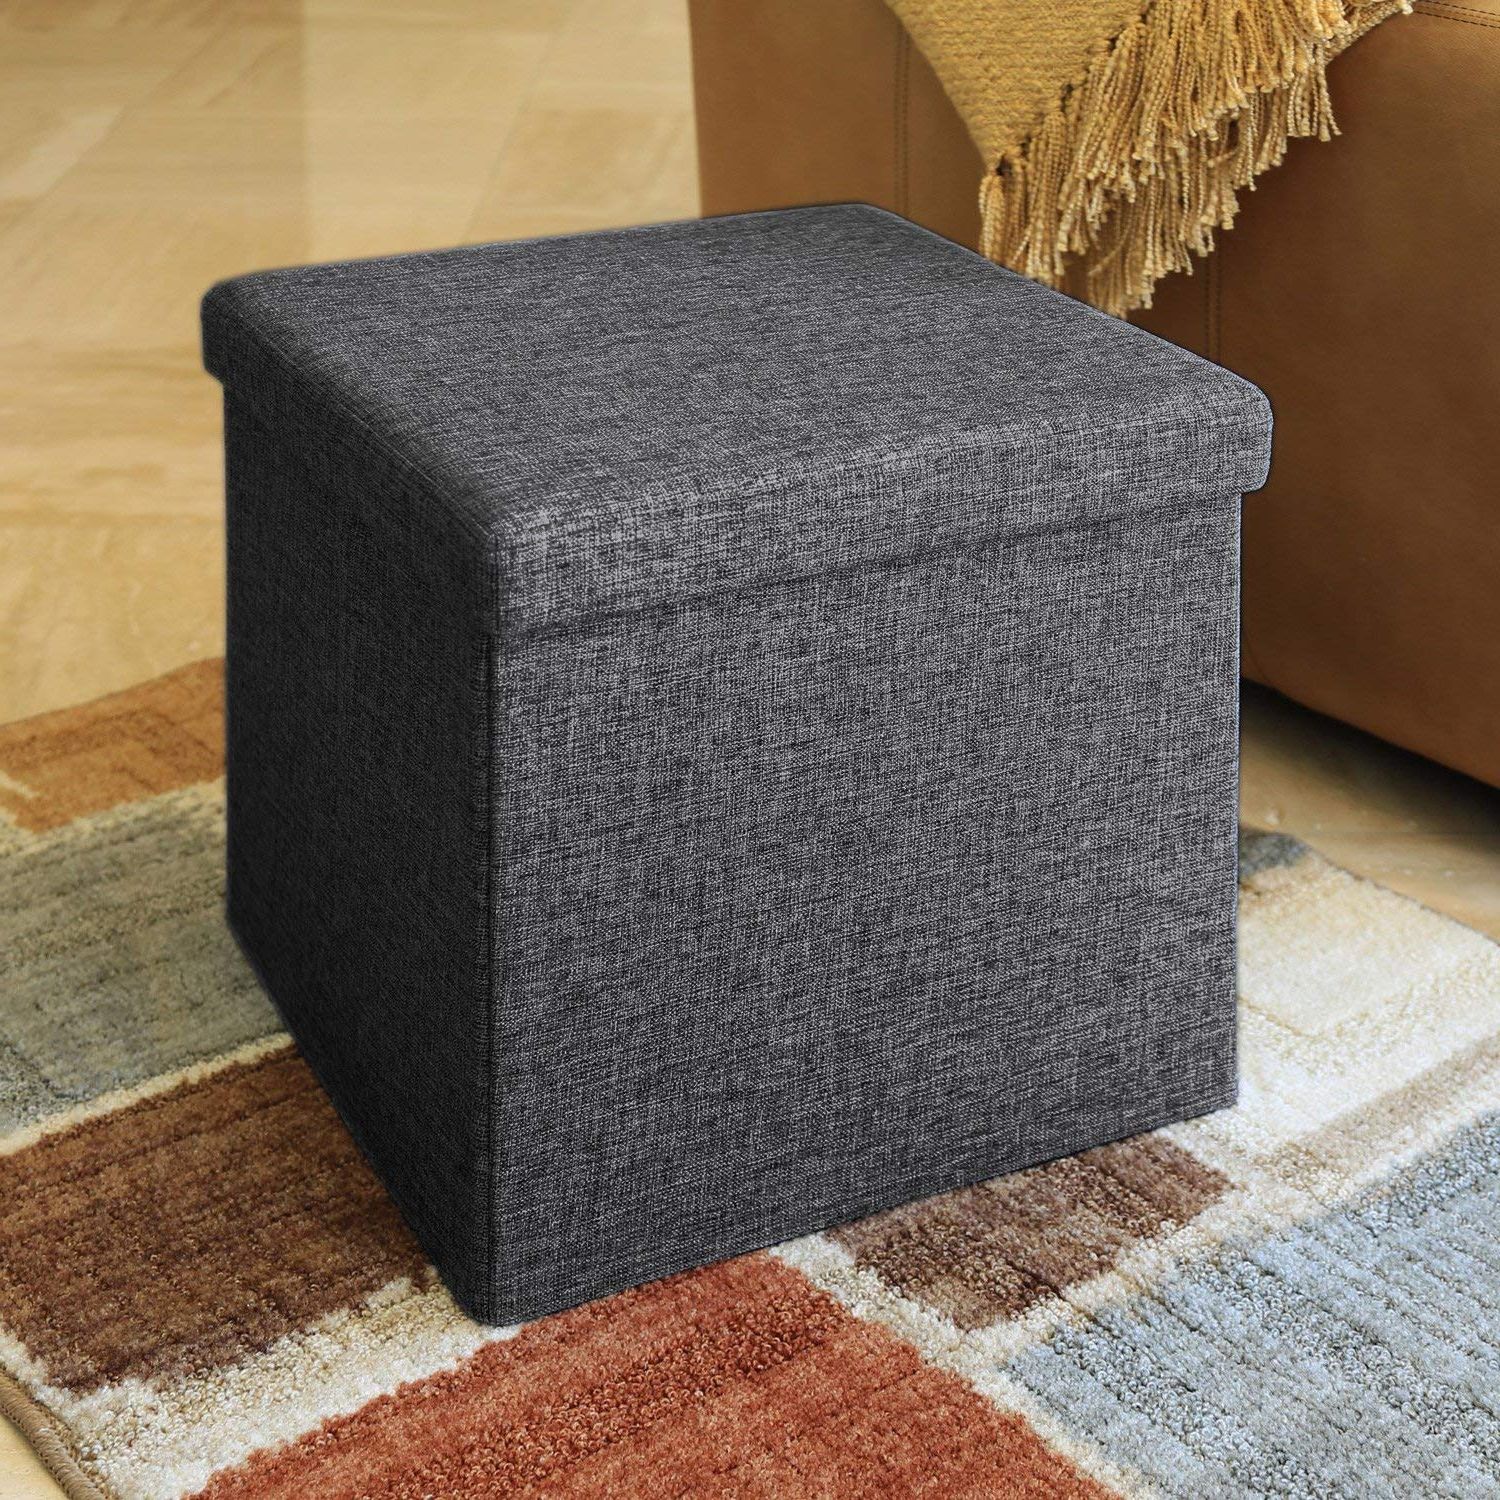 Preferred Charcoal And Light Gray Cotton Pouf Ottomans Within Seville Classics Foldable Storage Ottoman, Charcoal Gray (2 Pack (View 8 of 10)